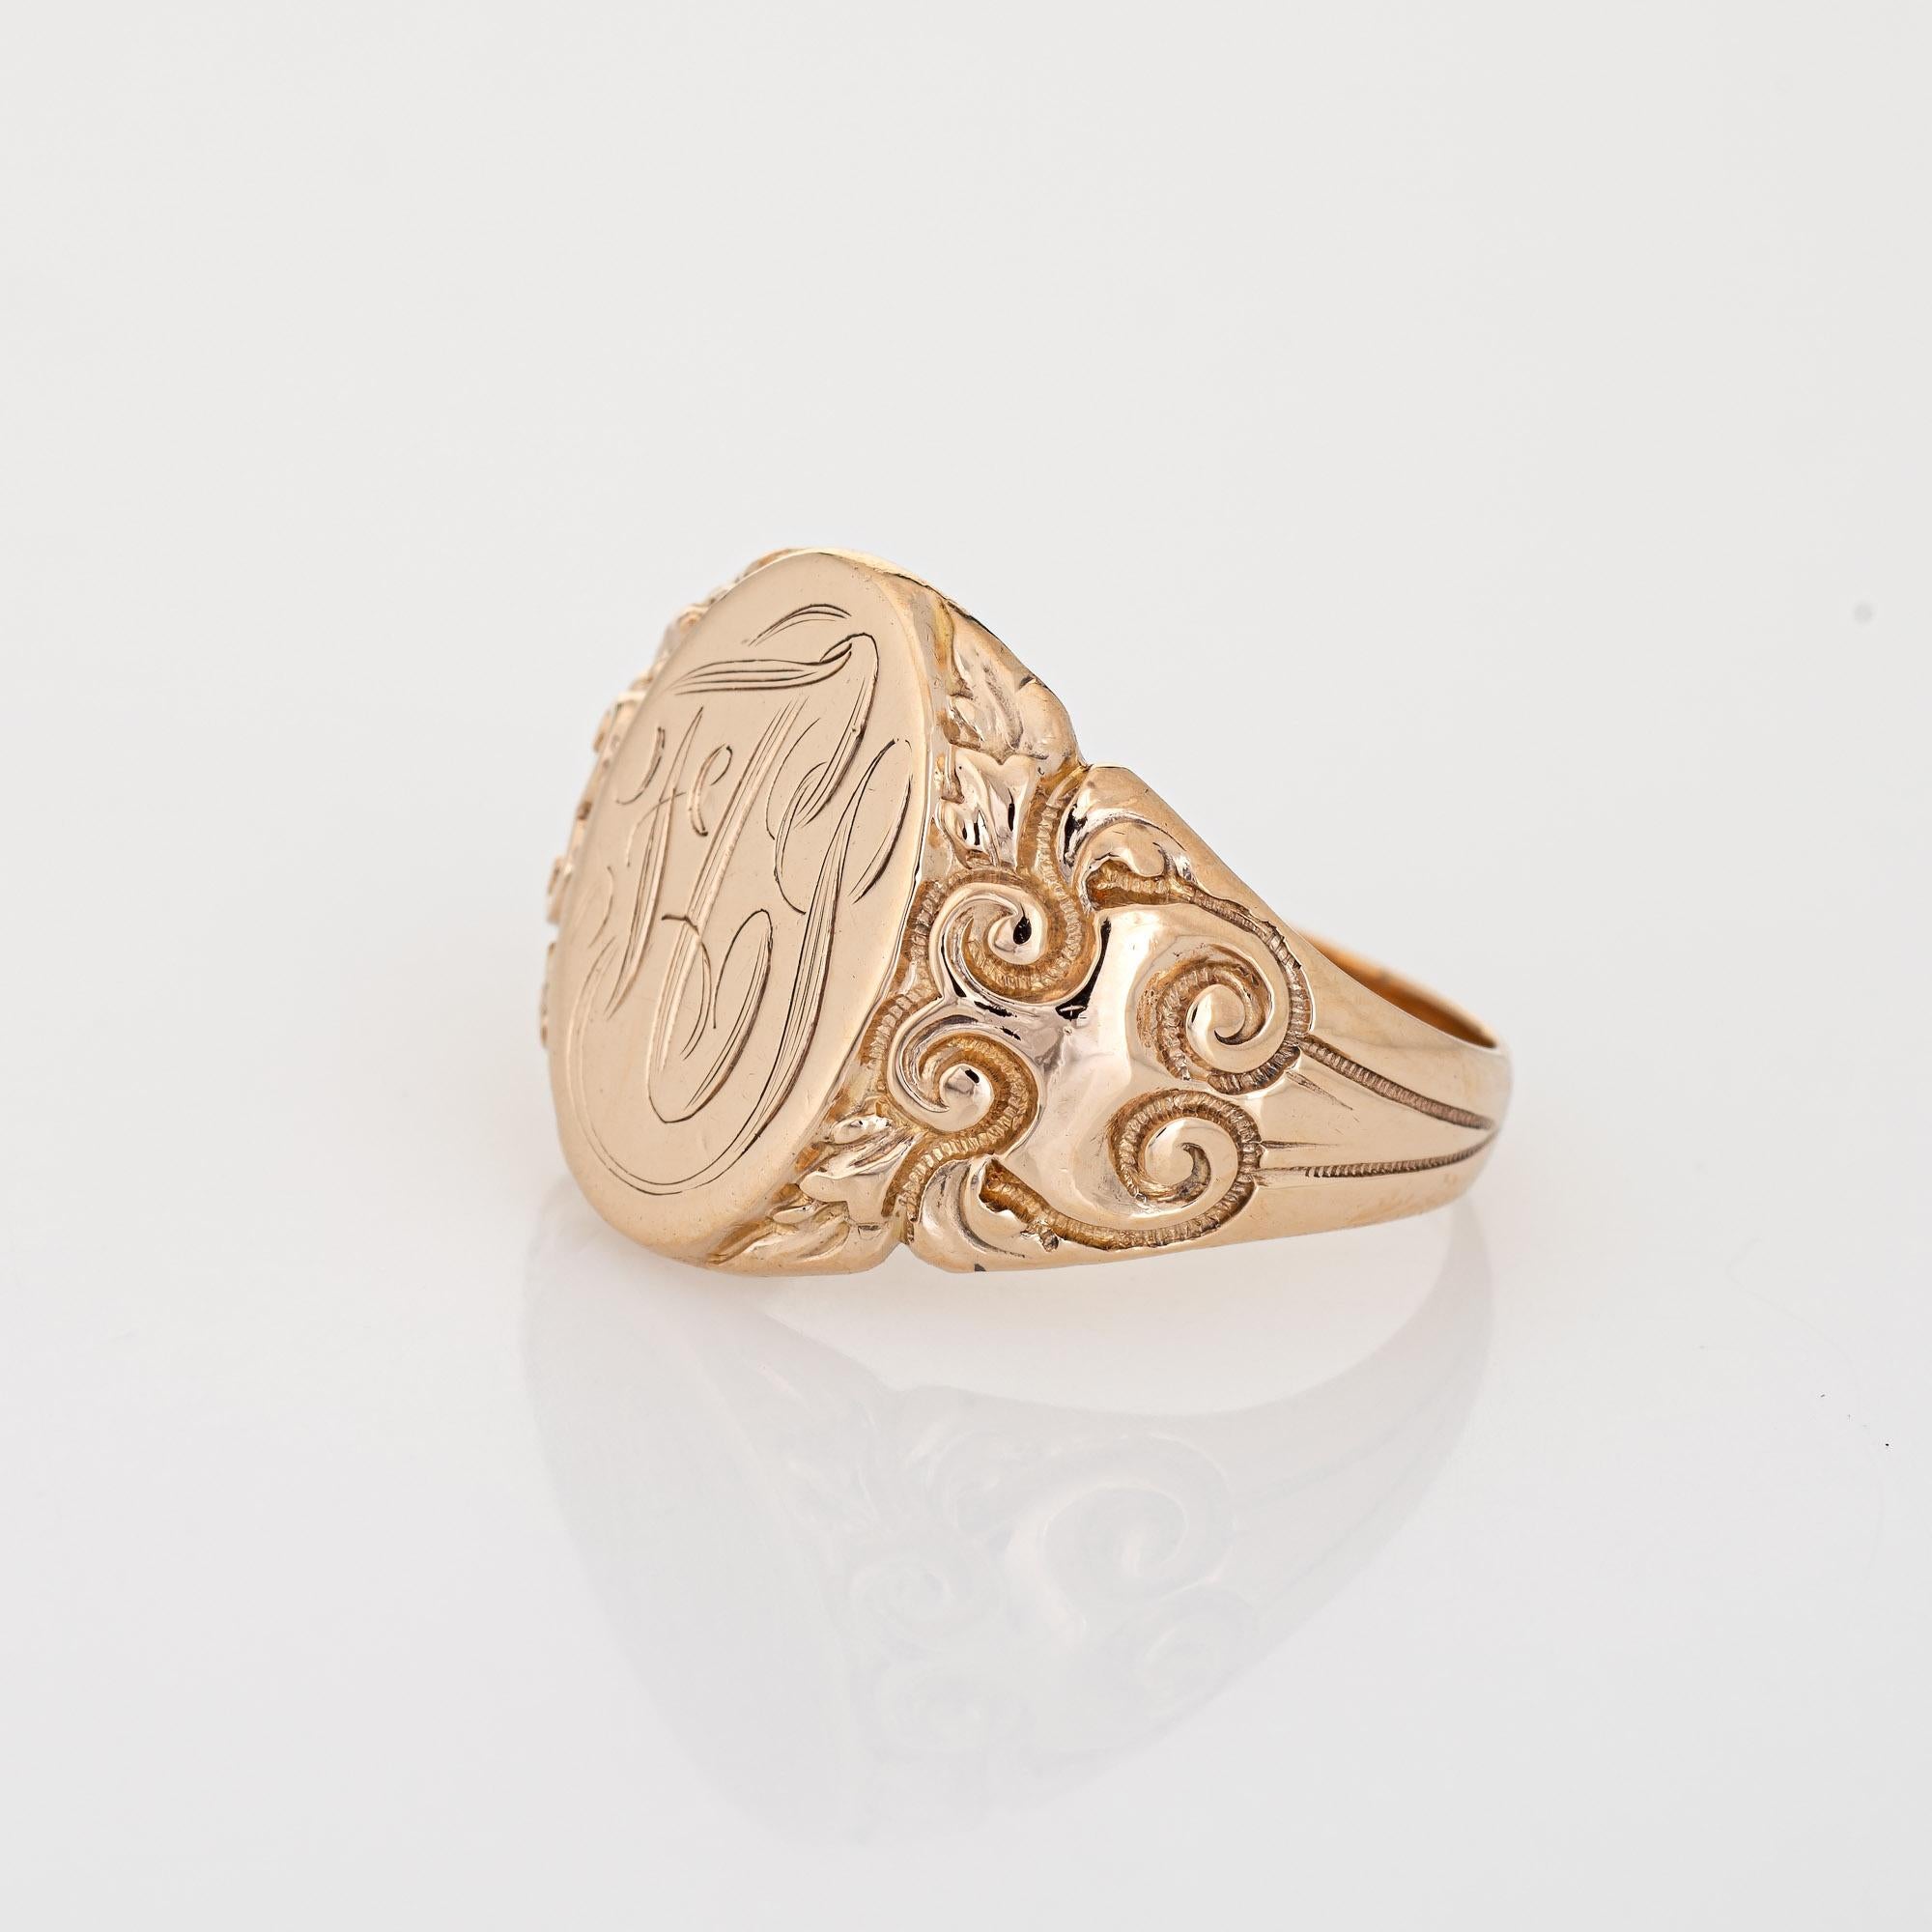 Women's Antique Victorian Signet Ring 10k Yellow Gold Oval Monogram Scrolled For Sale